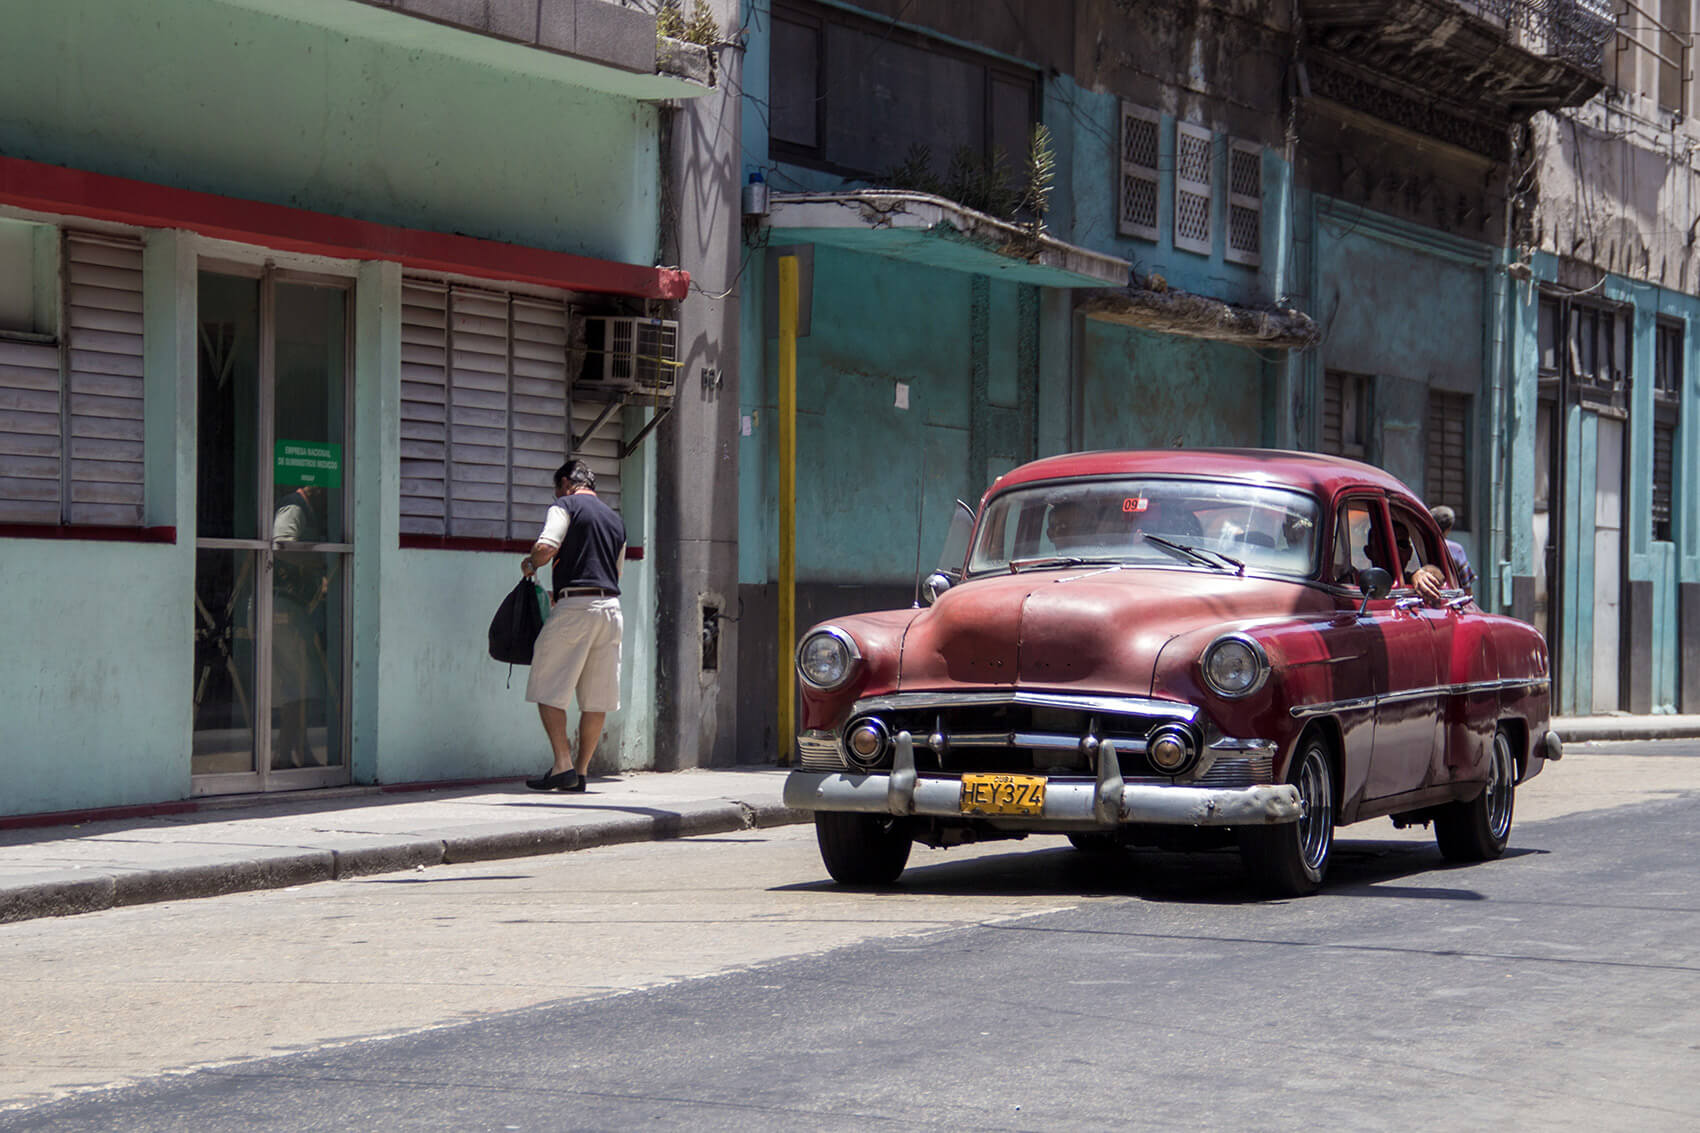 Old 50s red car in La Habana